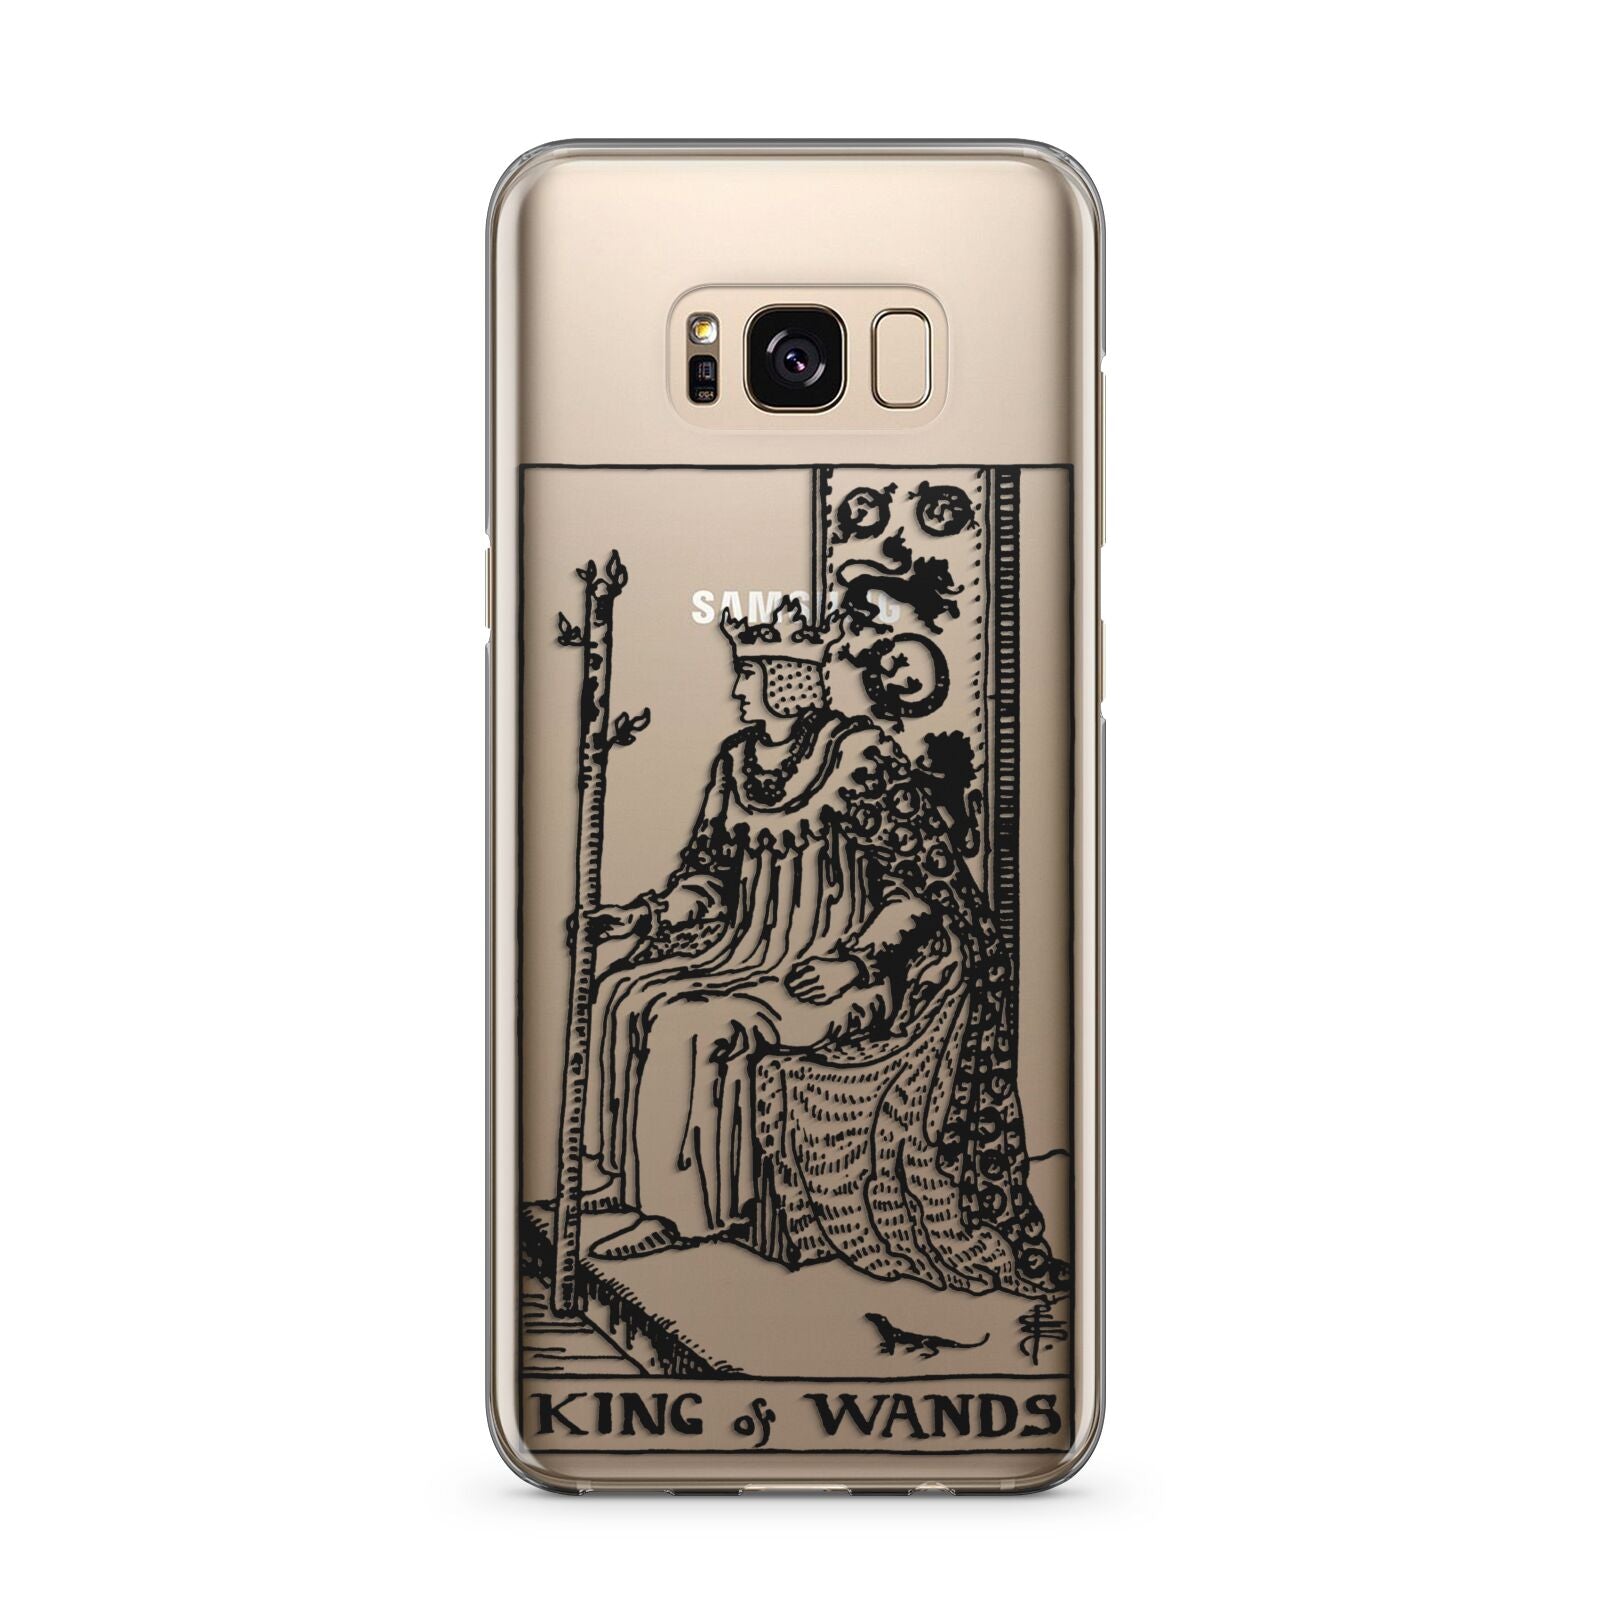 King of Wands Monochrome Samsung Galaxy S8 Plus Case